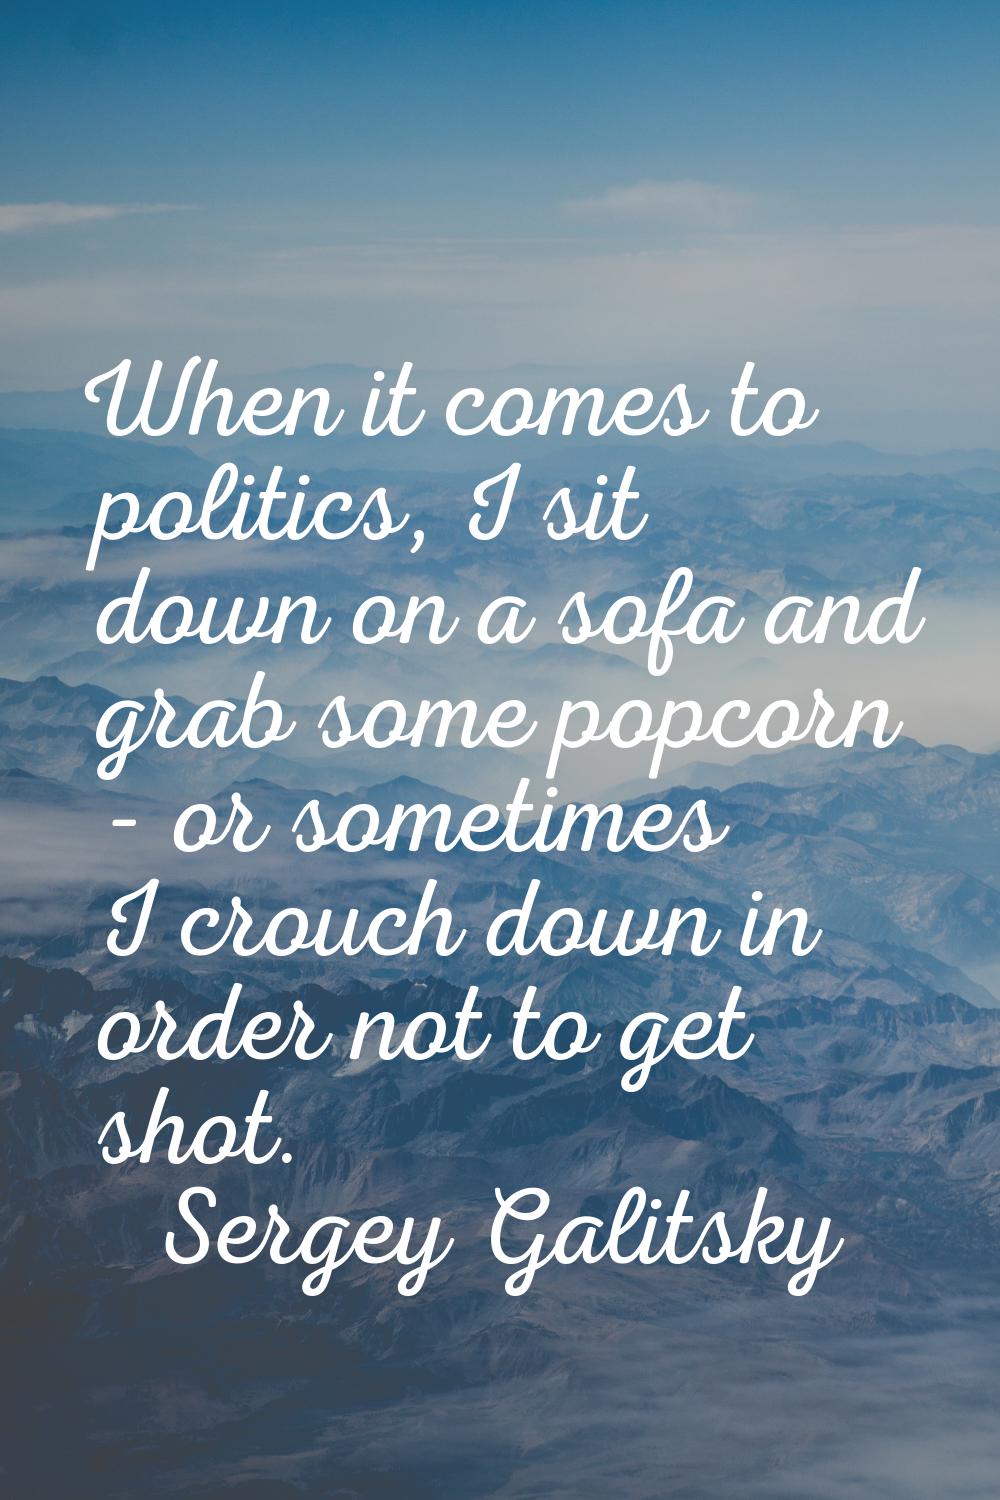 When it comes to politics, I sit down on a sofa and grab some popcorn - or sometimes I crouch down 